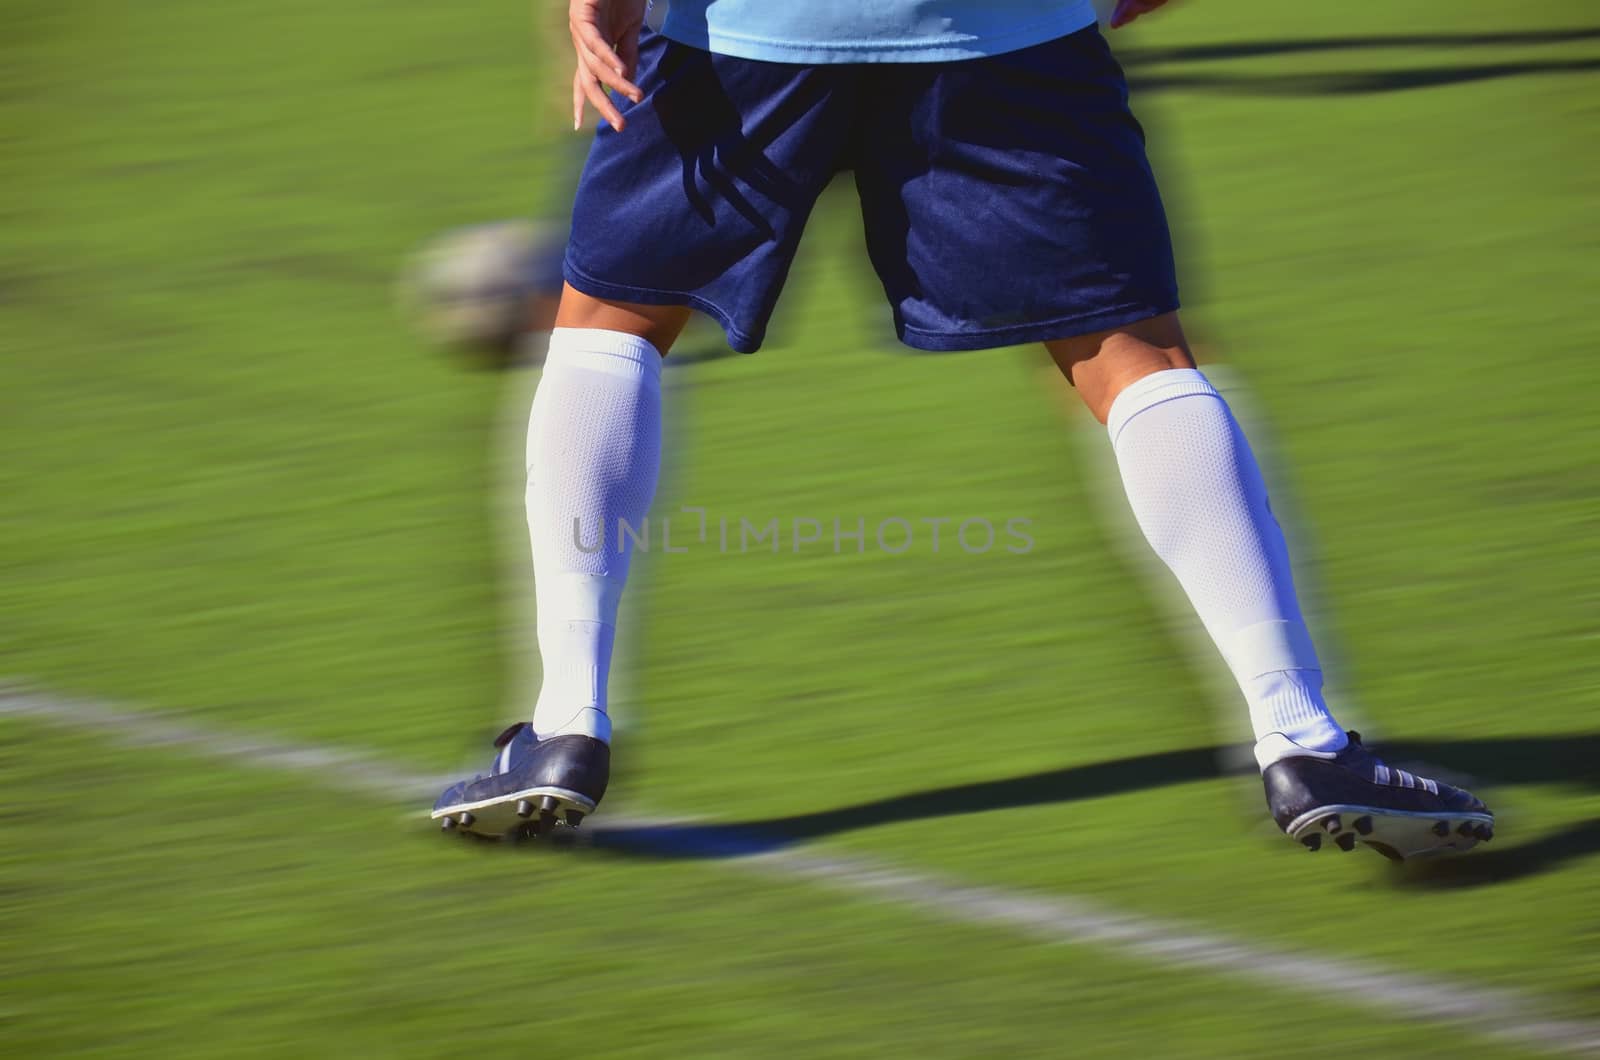 Soccer player waiting for ball by alentejano